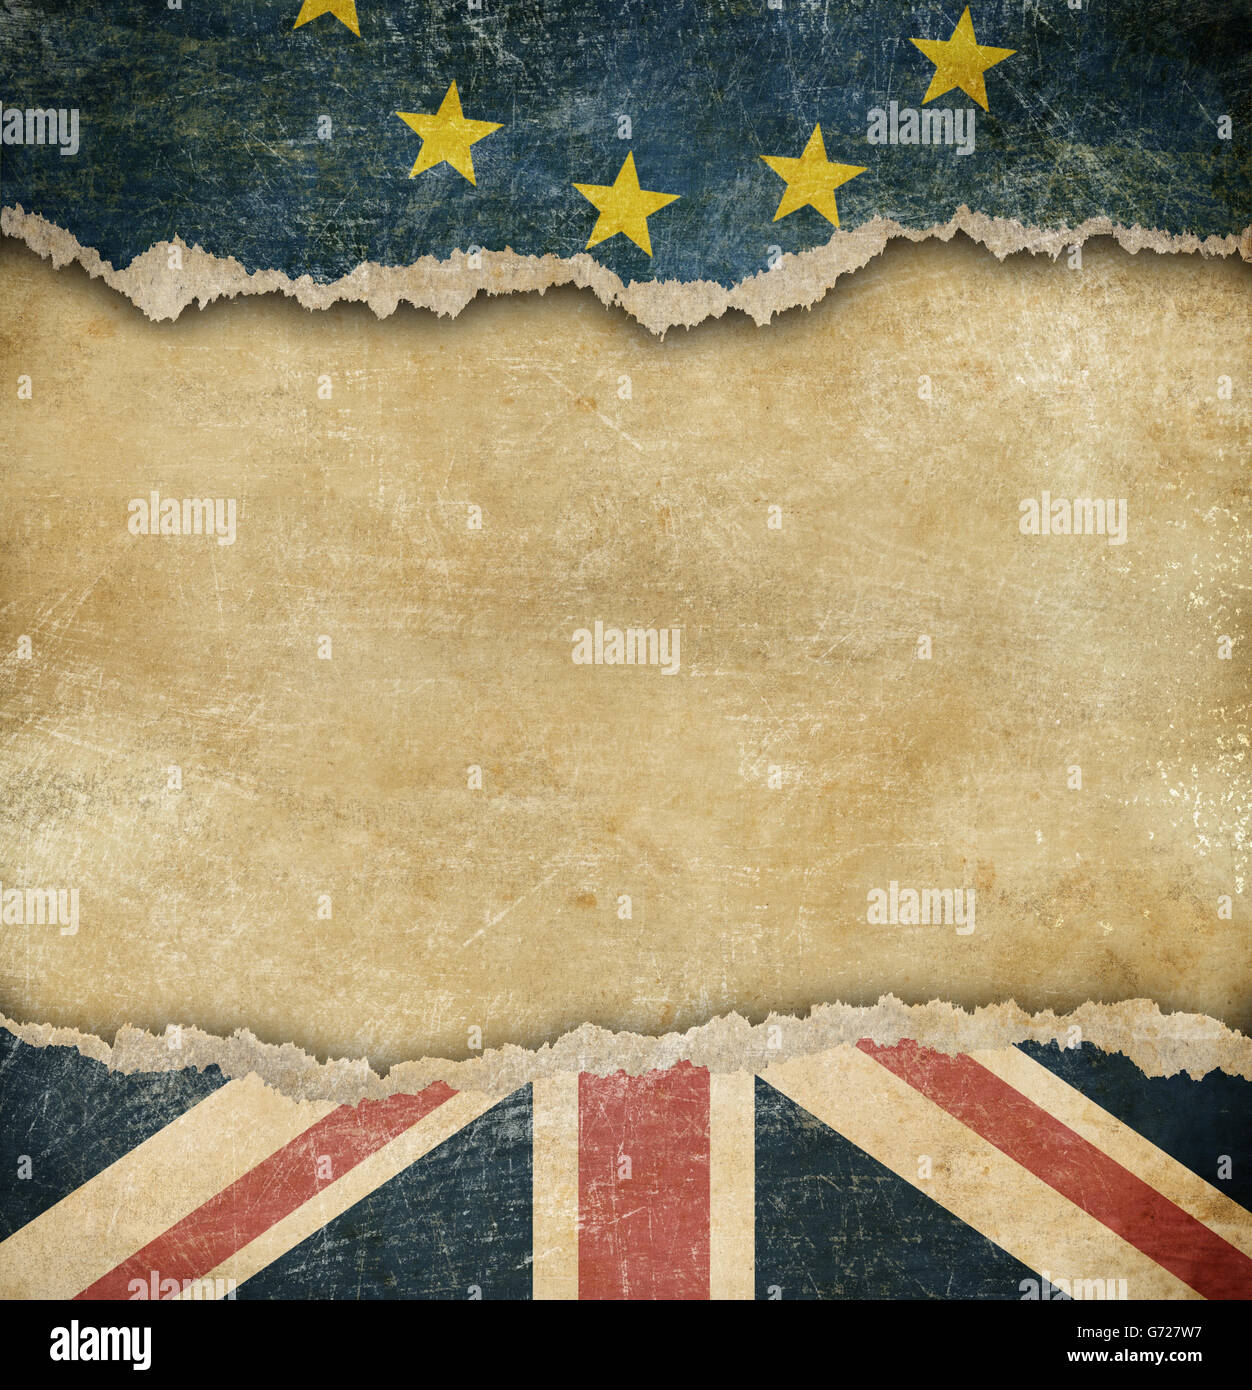 Brexit - European union and Great Britain flags on cardboard Stock Photo